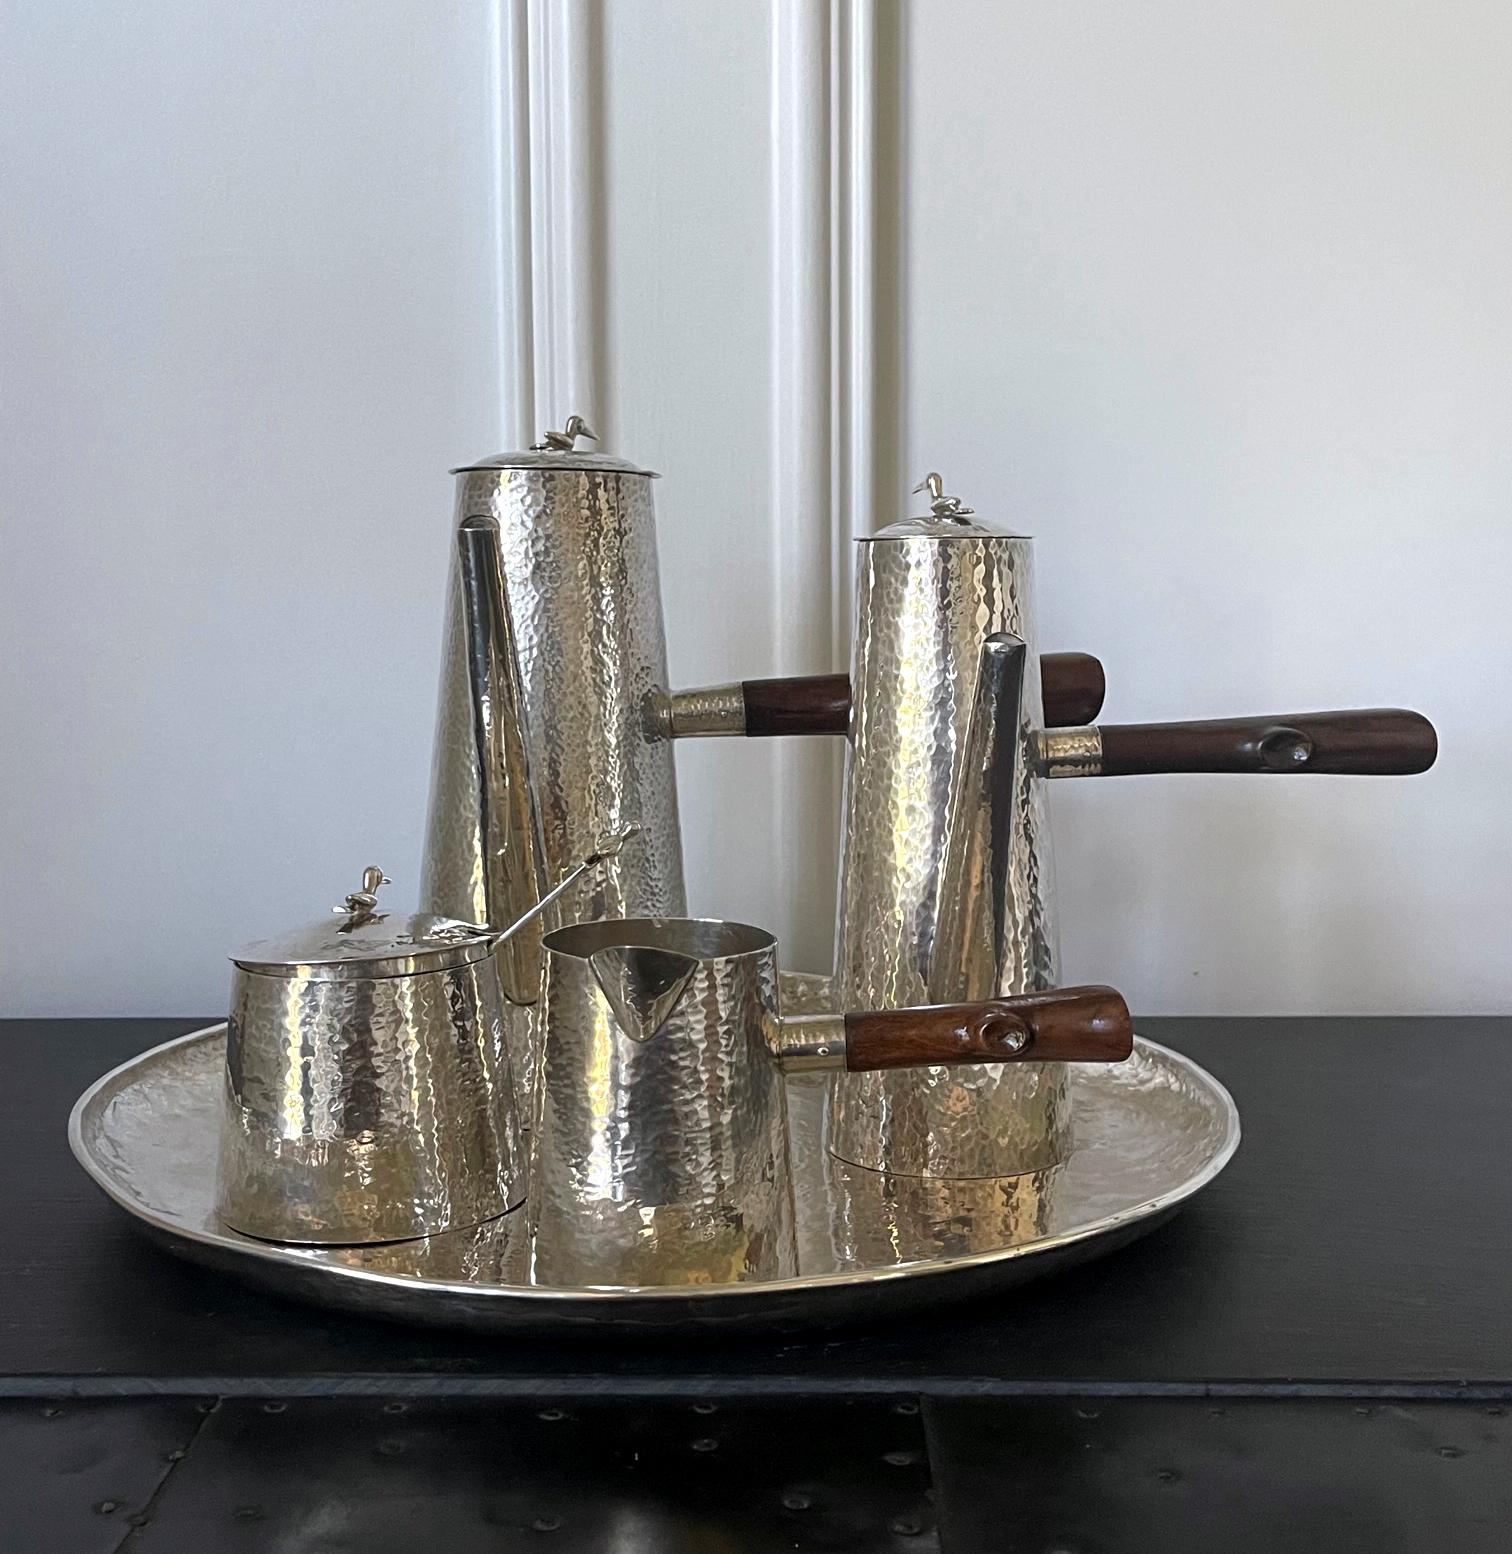 A sterling silver coffee service set consists of six pieces: a coffee pot, a chocolate pot, a covered sugar bowl with a serving spoon, a creamer and a round tray. Made in Peru circa mid to second half of 20th century, maybe 1970-80s, this modernist